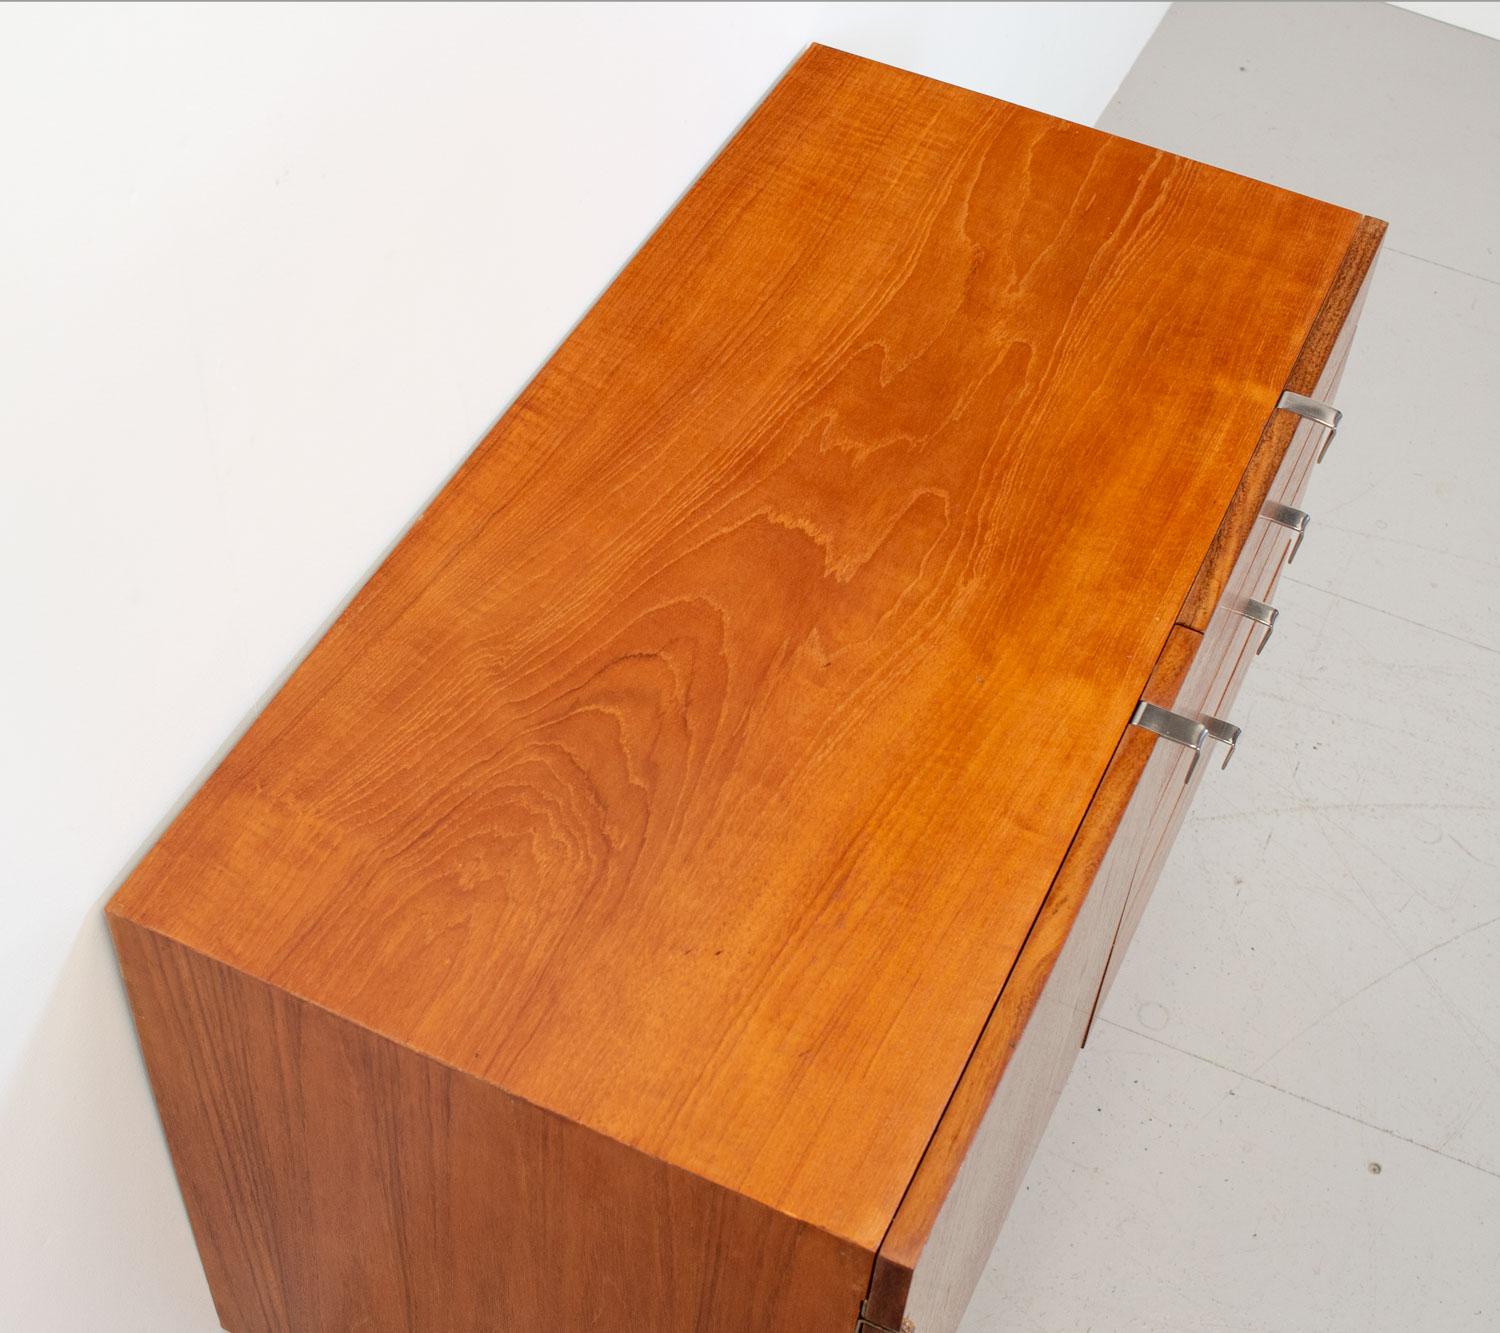 S Range teak sideboard designed by John and Sylvia Reid in 1959 for Stag. This iconic piece of British design features a beech lined interior, with nickel plated ‘L’ shaped recessed handles and ‘V’shaped legs. It comprises 4 drawers, the top one